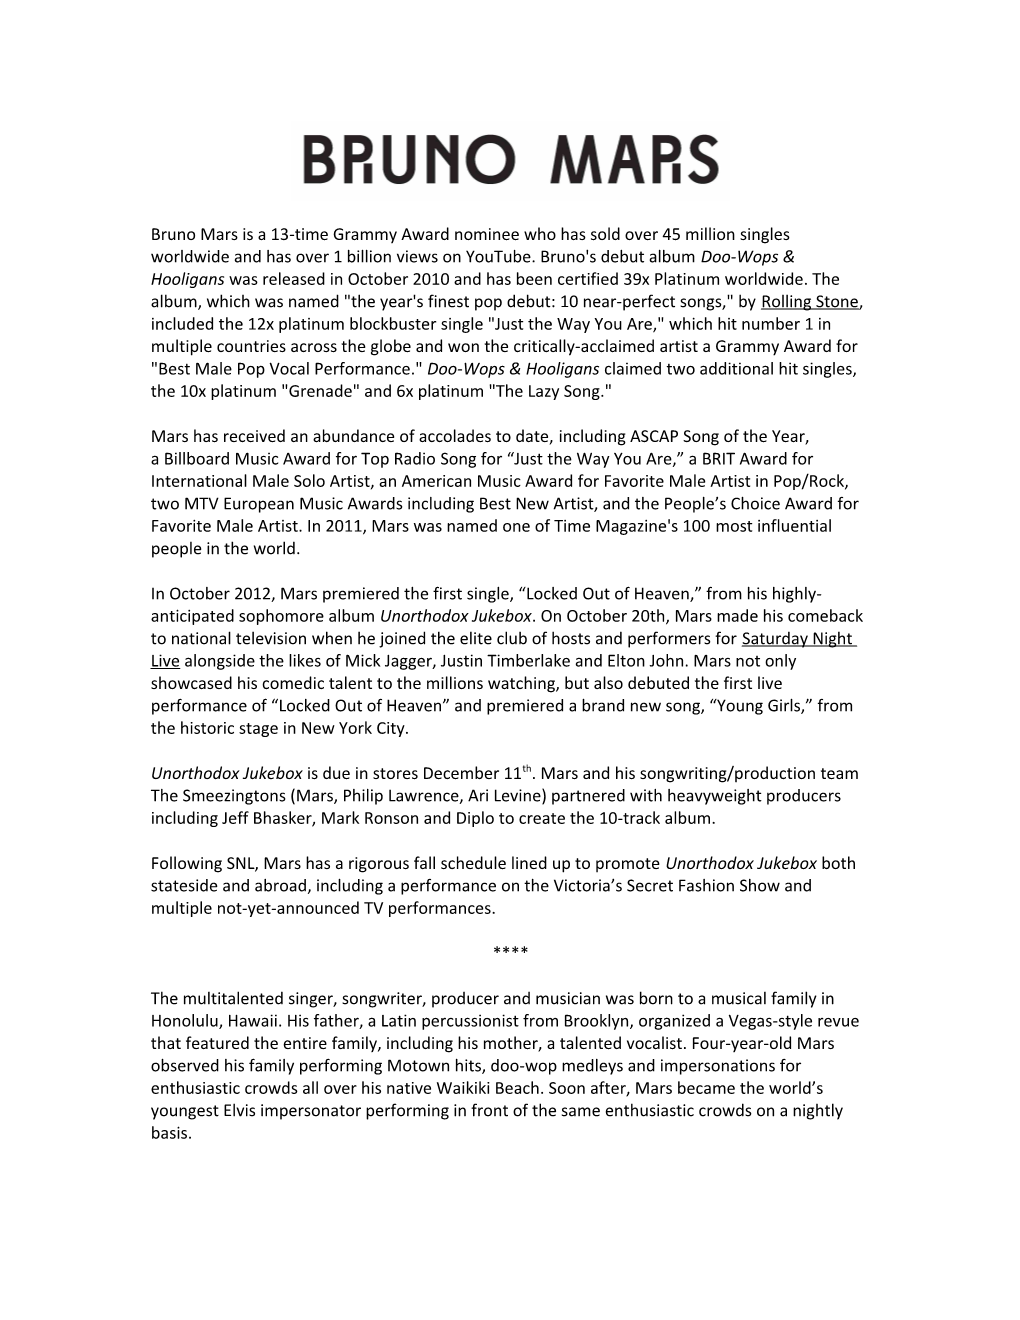 Bruno Mars Is a 13-Time Grammy Award Nominee Who Has Sold Over 45 Million Singles Worldwide